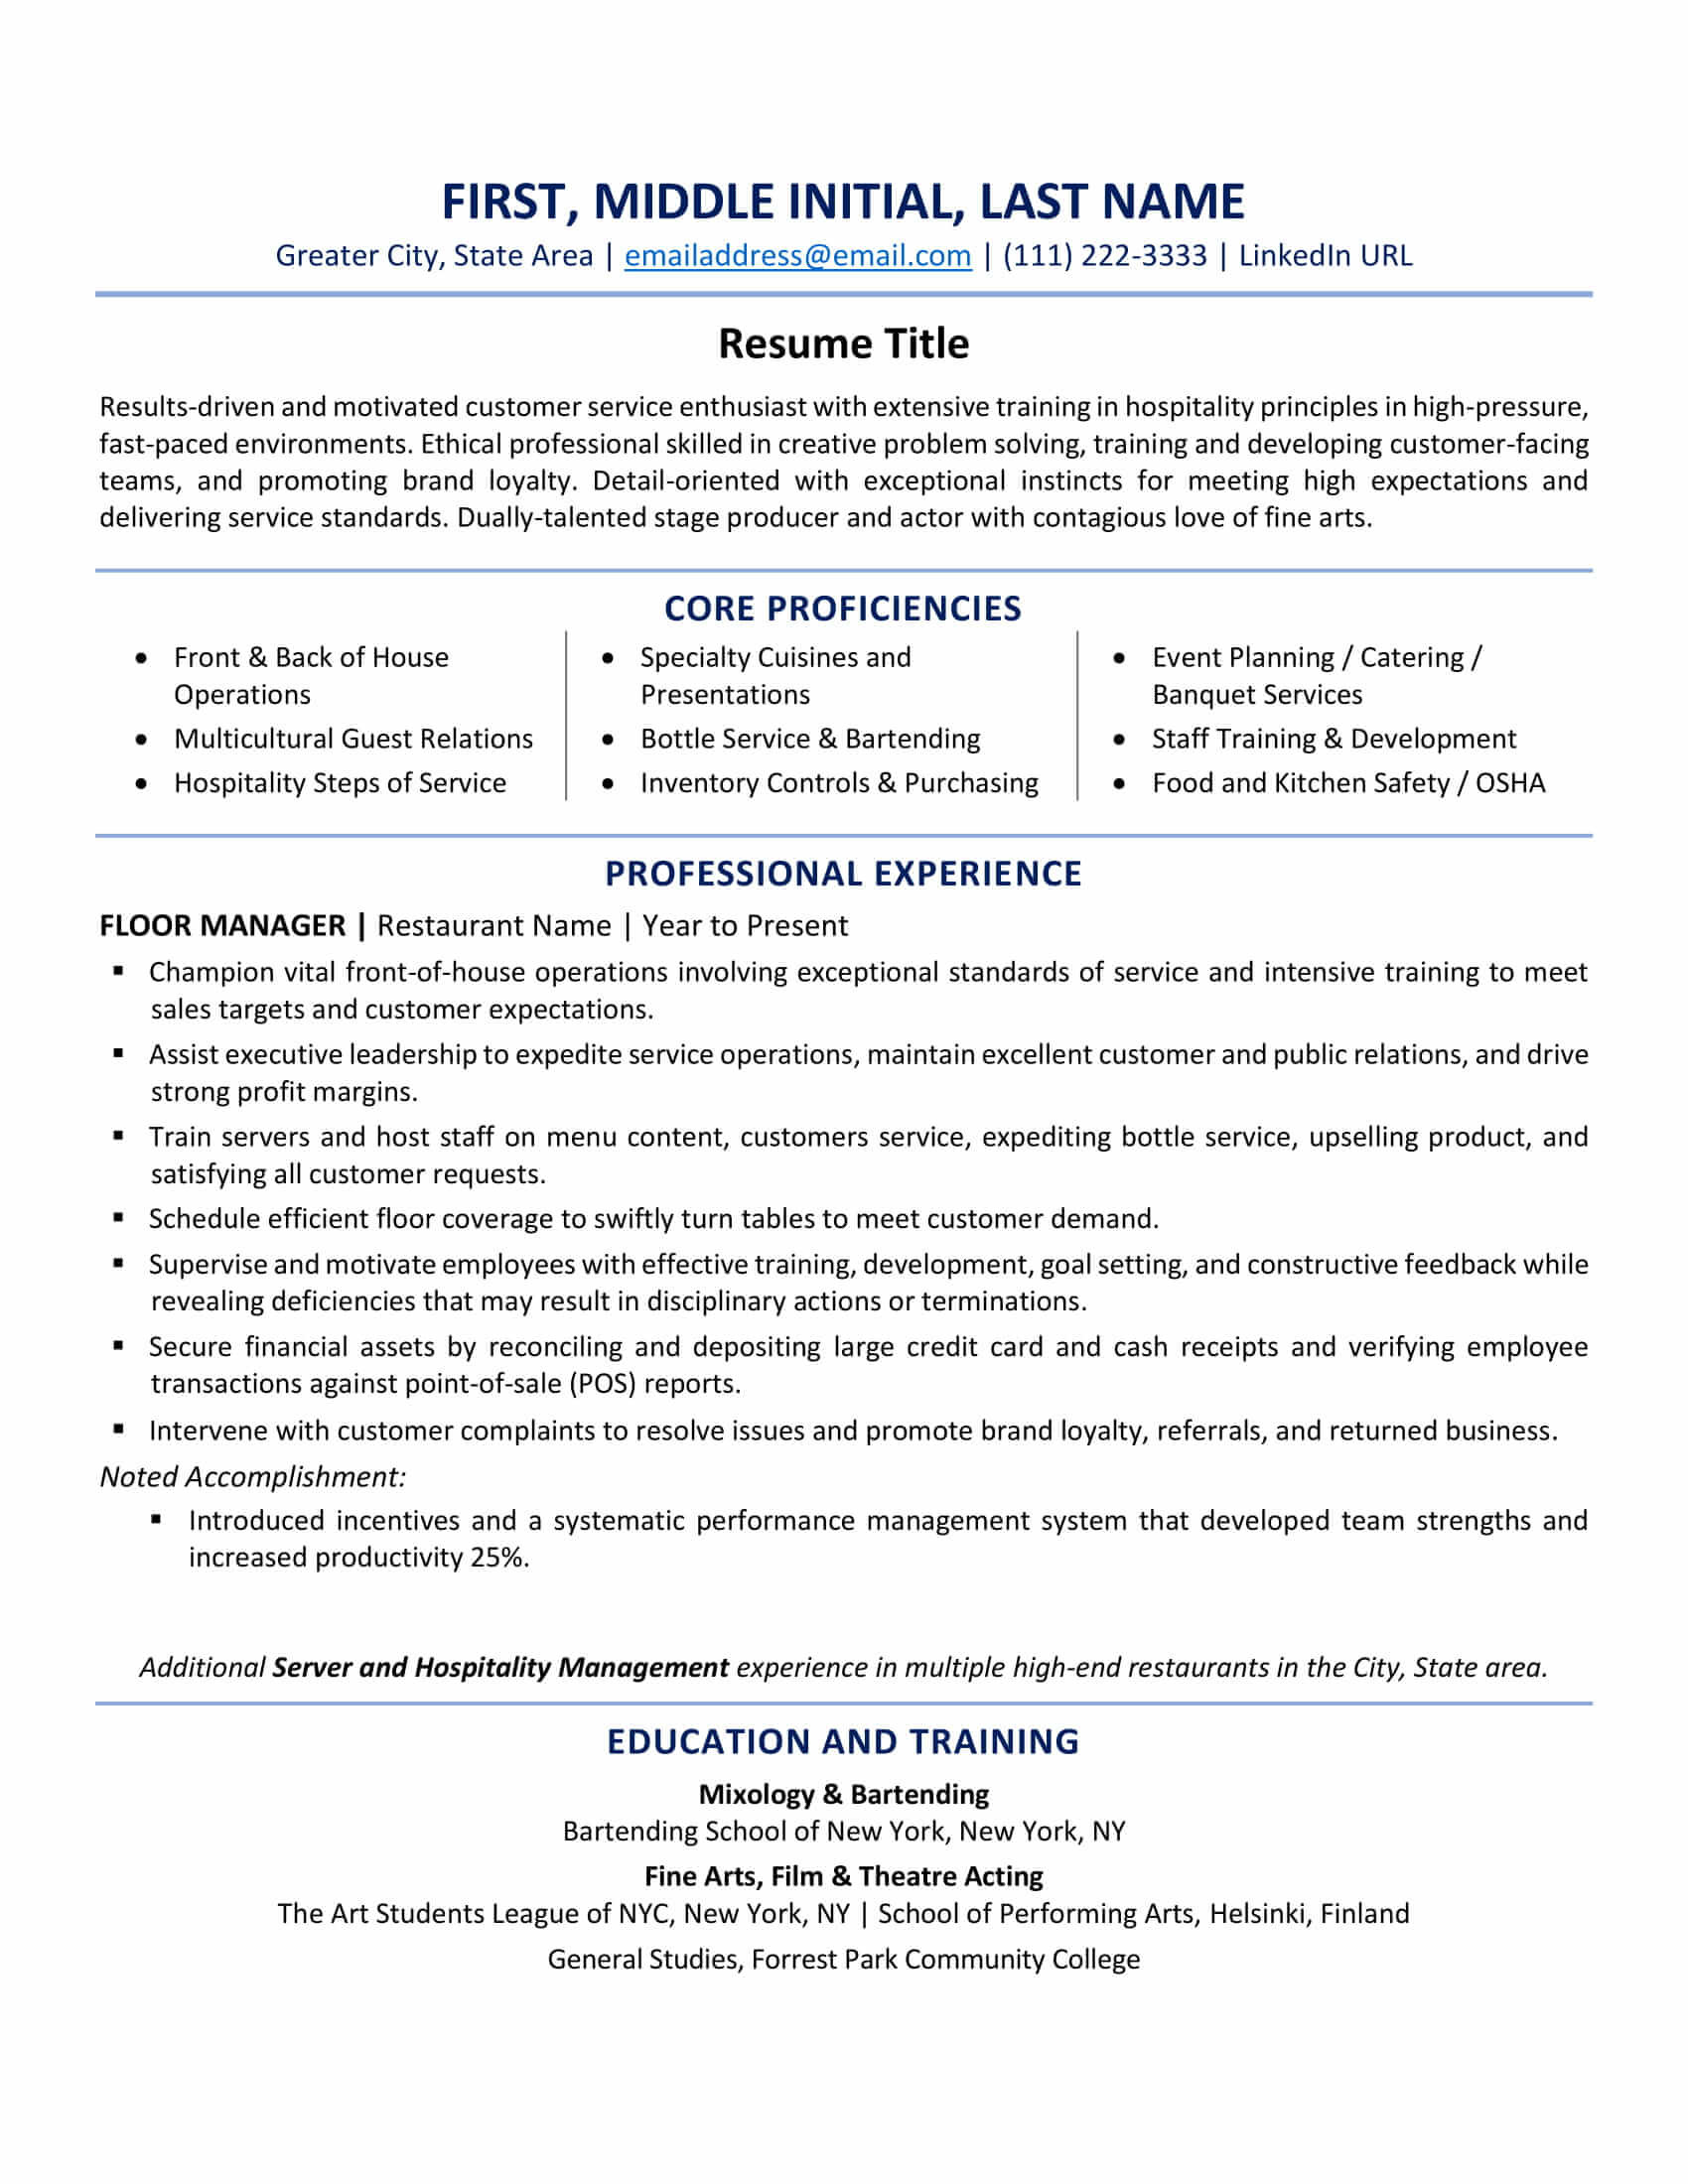 Resume Sample for Long Term Employment 7 No-fail Resume Tips for Older Workers (lancarrezekiq Examples) Zipjob